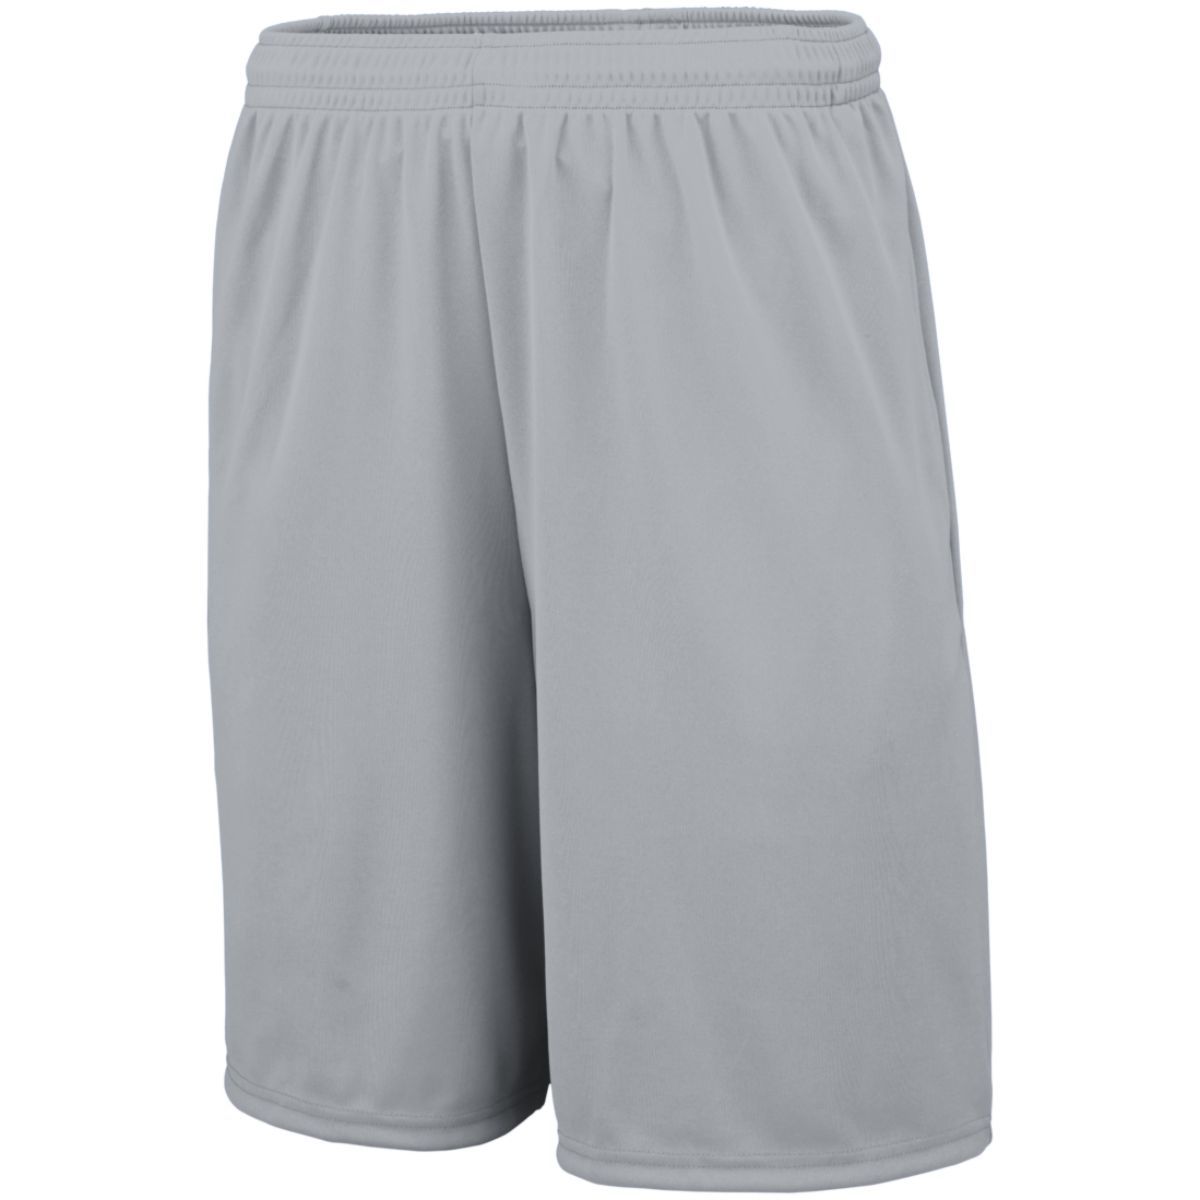 Youth Training Shorts With Pockets - 1429